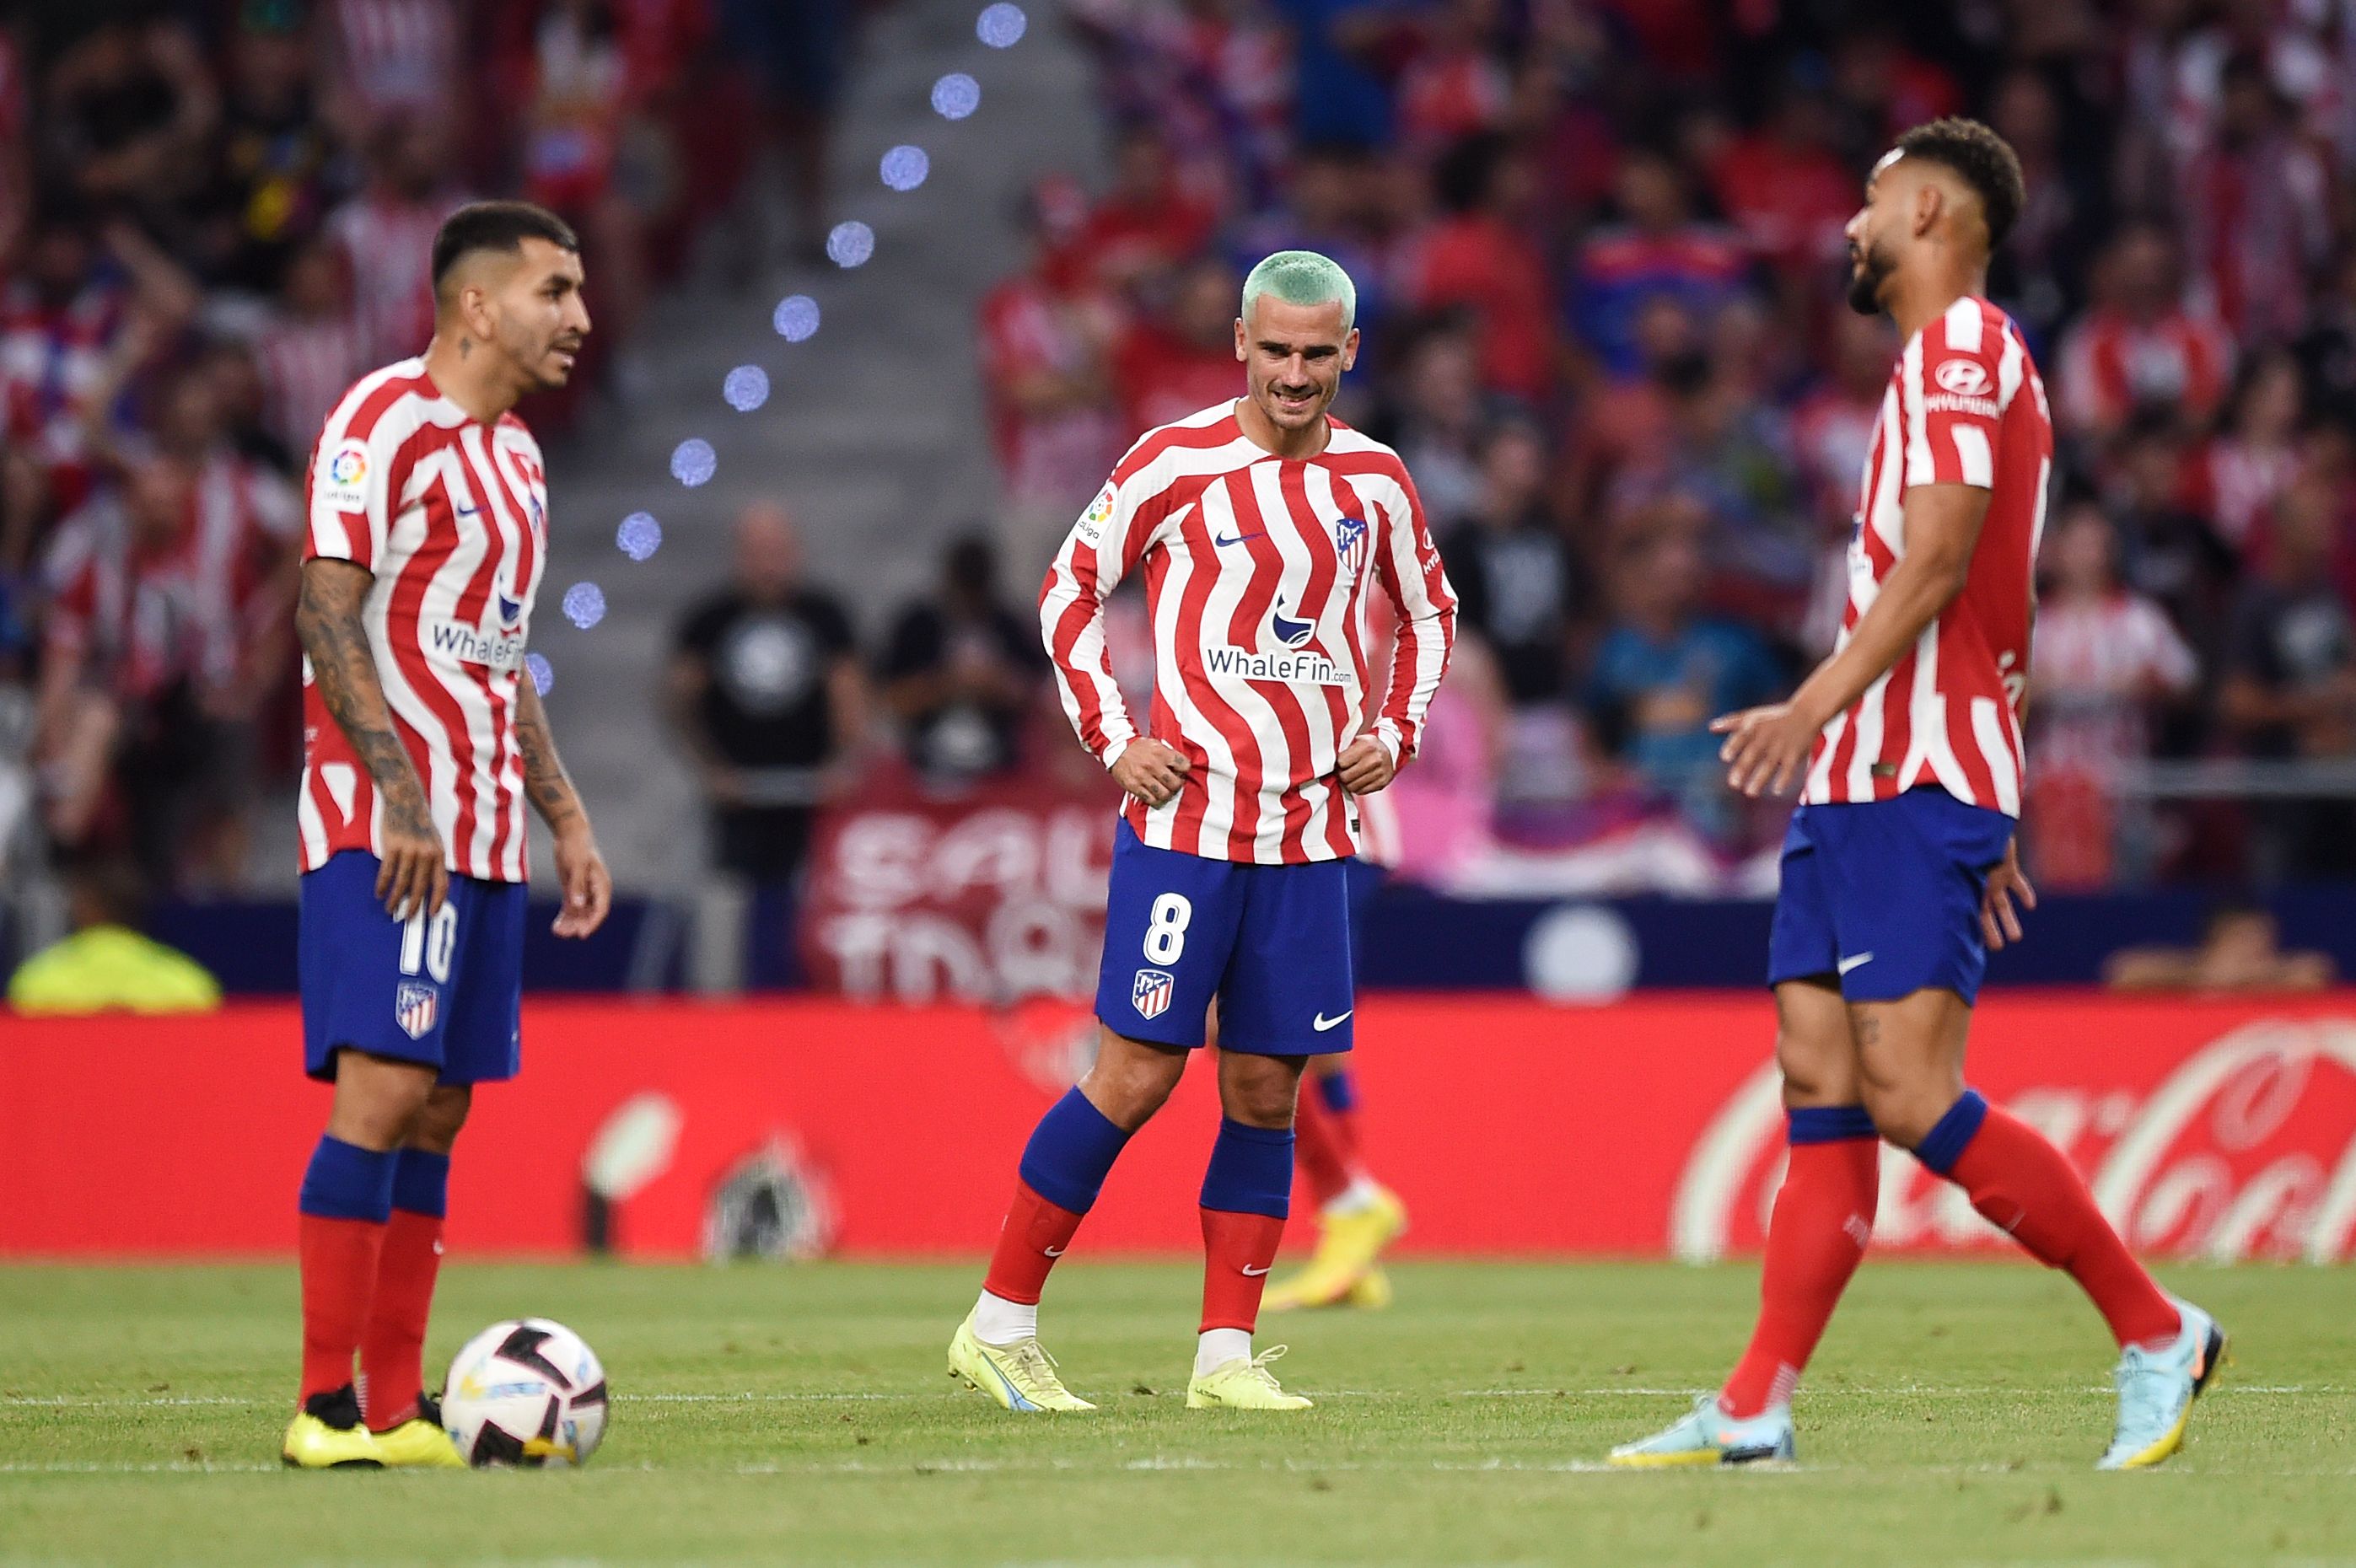 Atletico Madrid players in action vs Villarreal